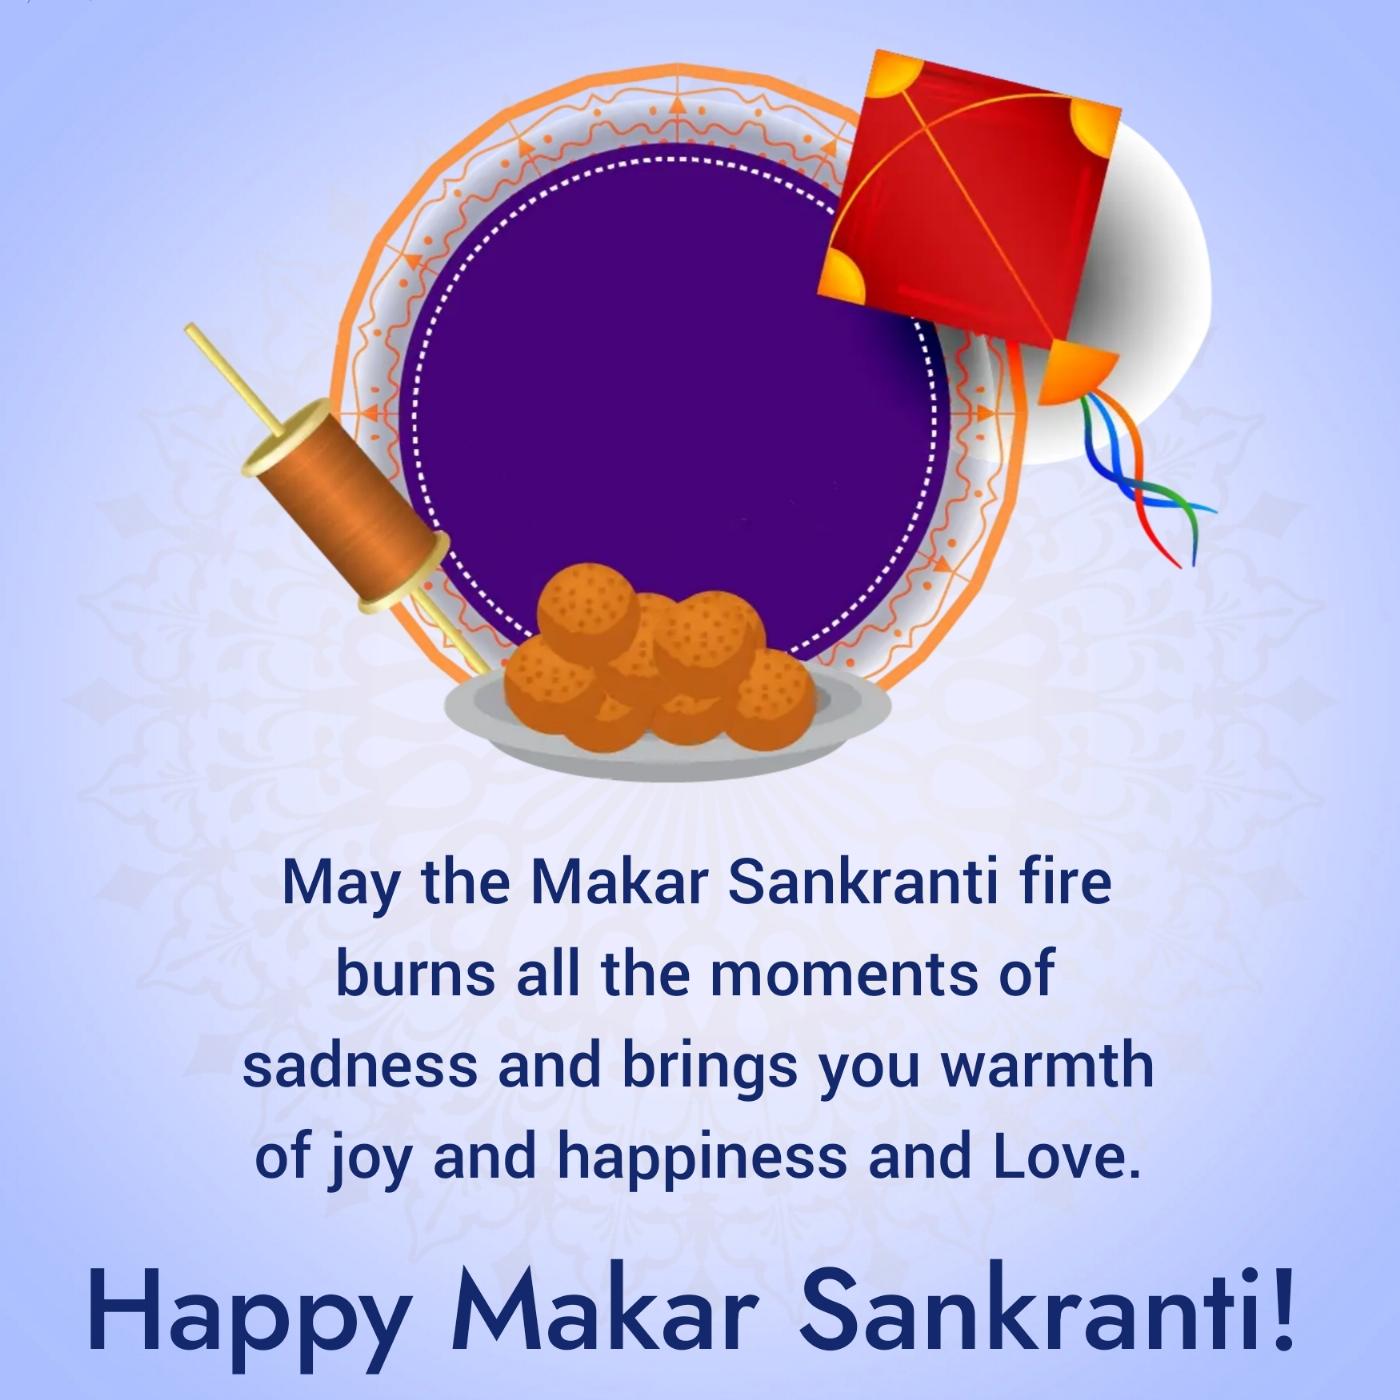 May the Makar Sankranti fire burns all the moments of sadness